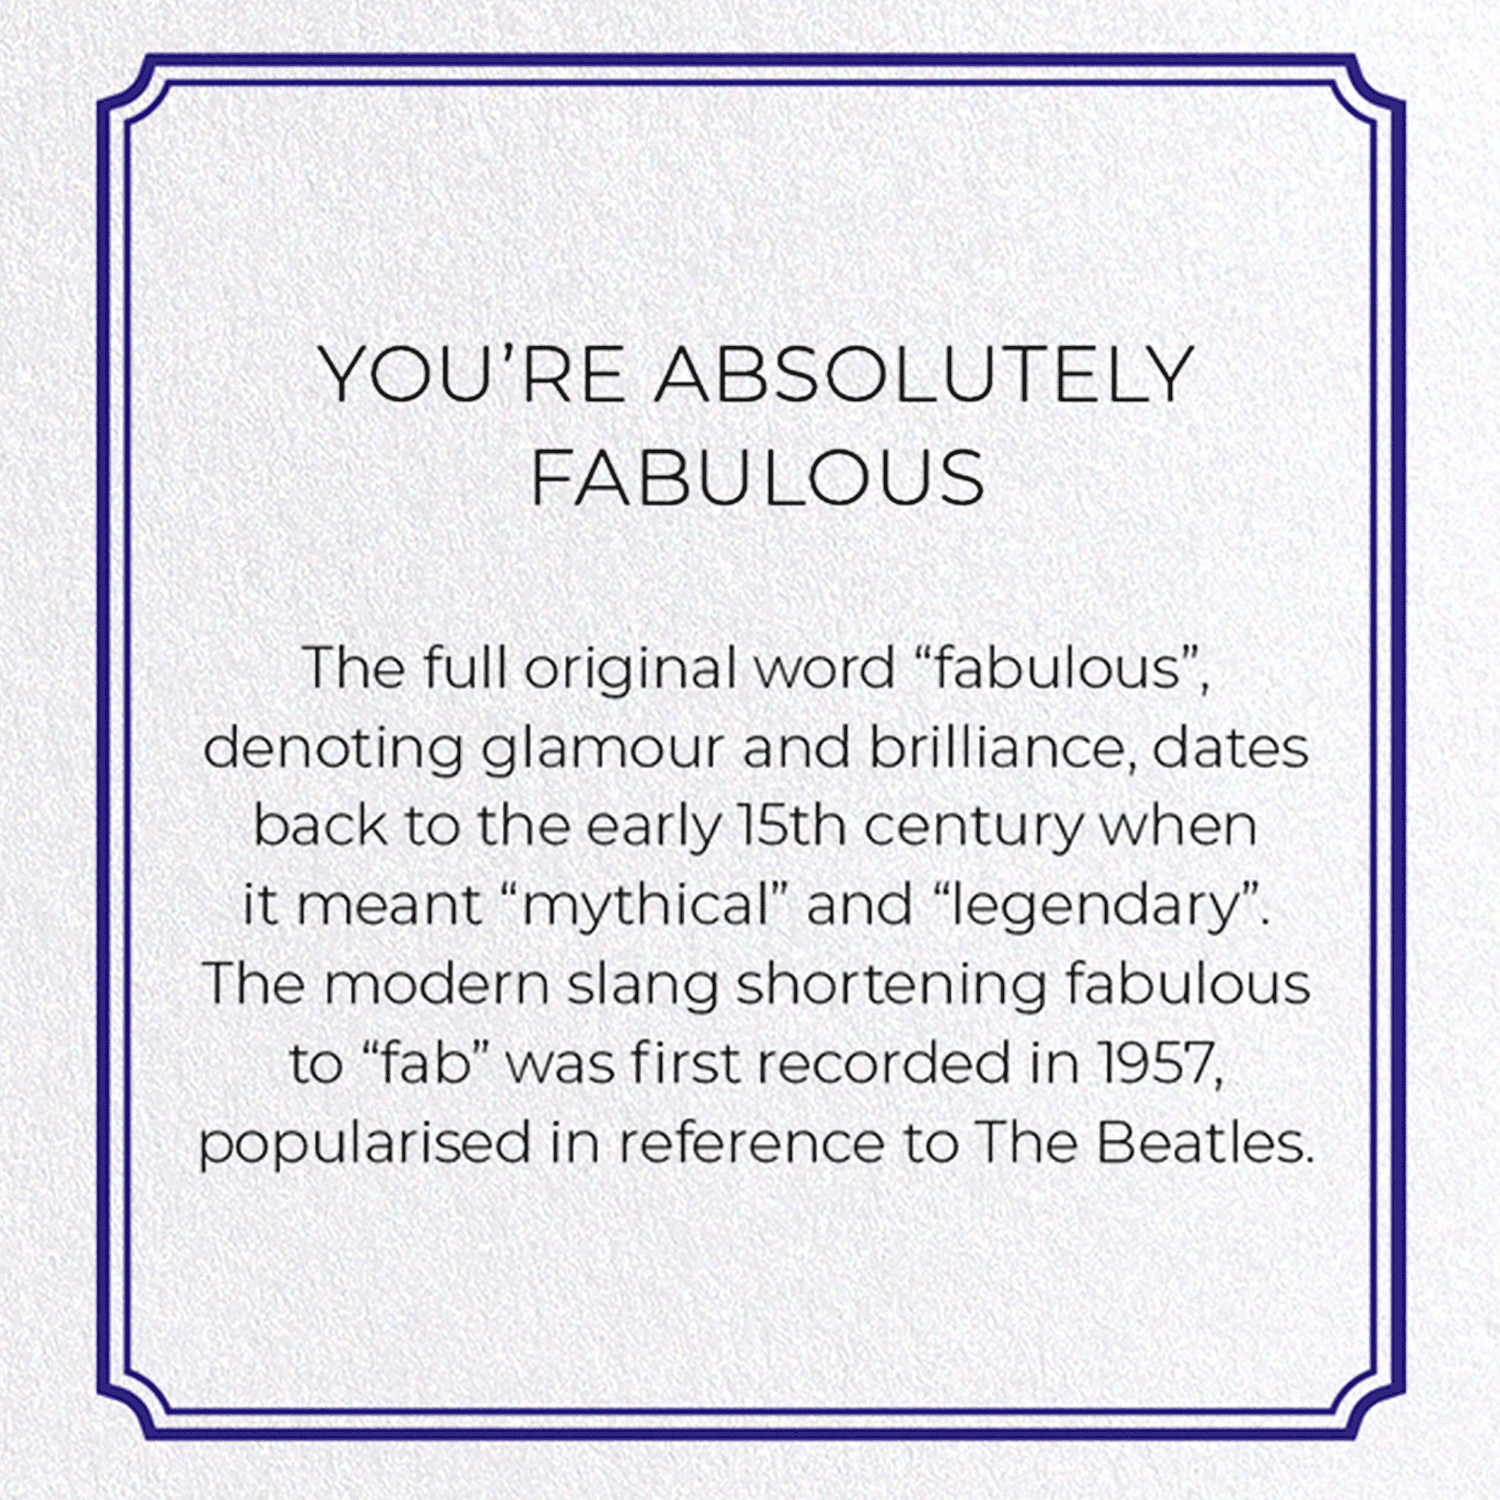 YOU’RE ABSOLUTELY FABULOUS